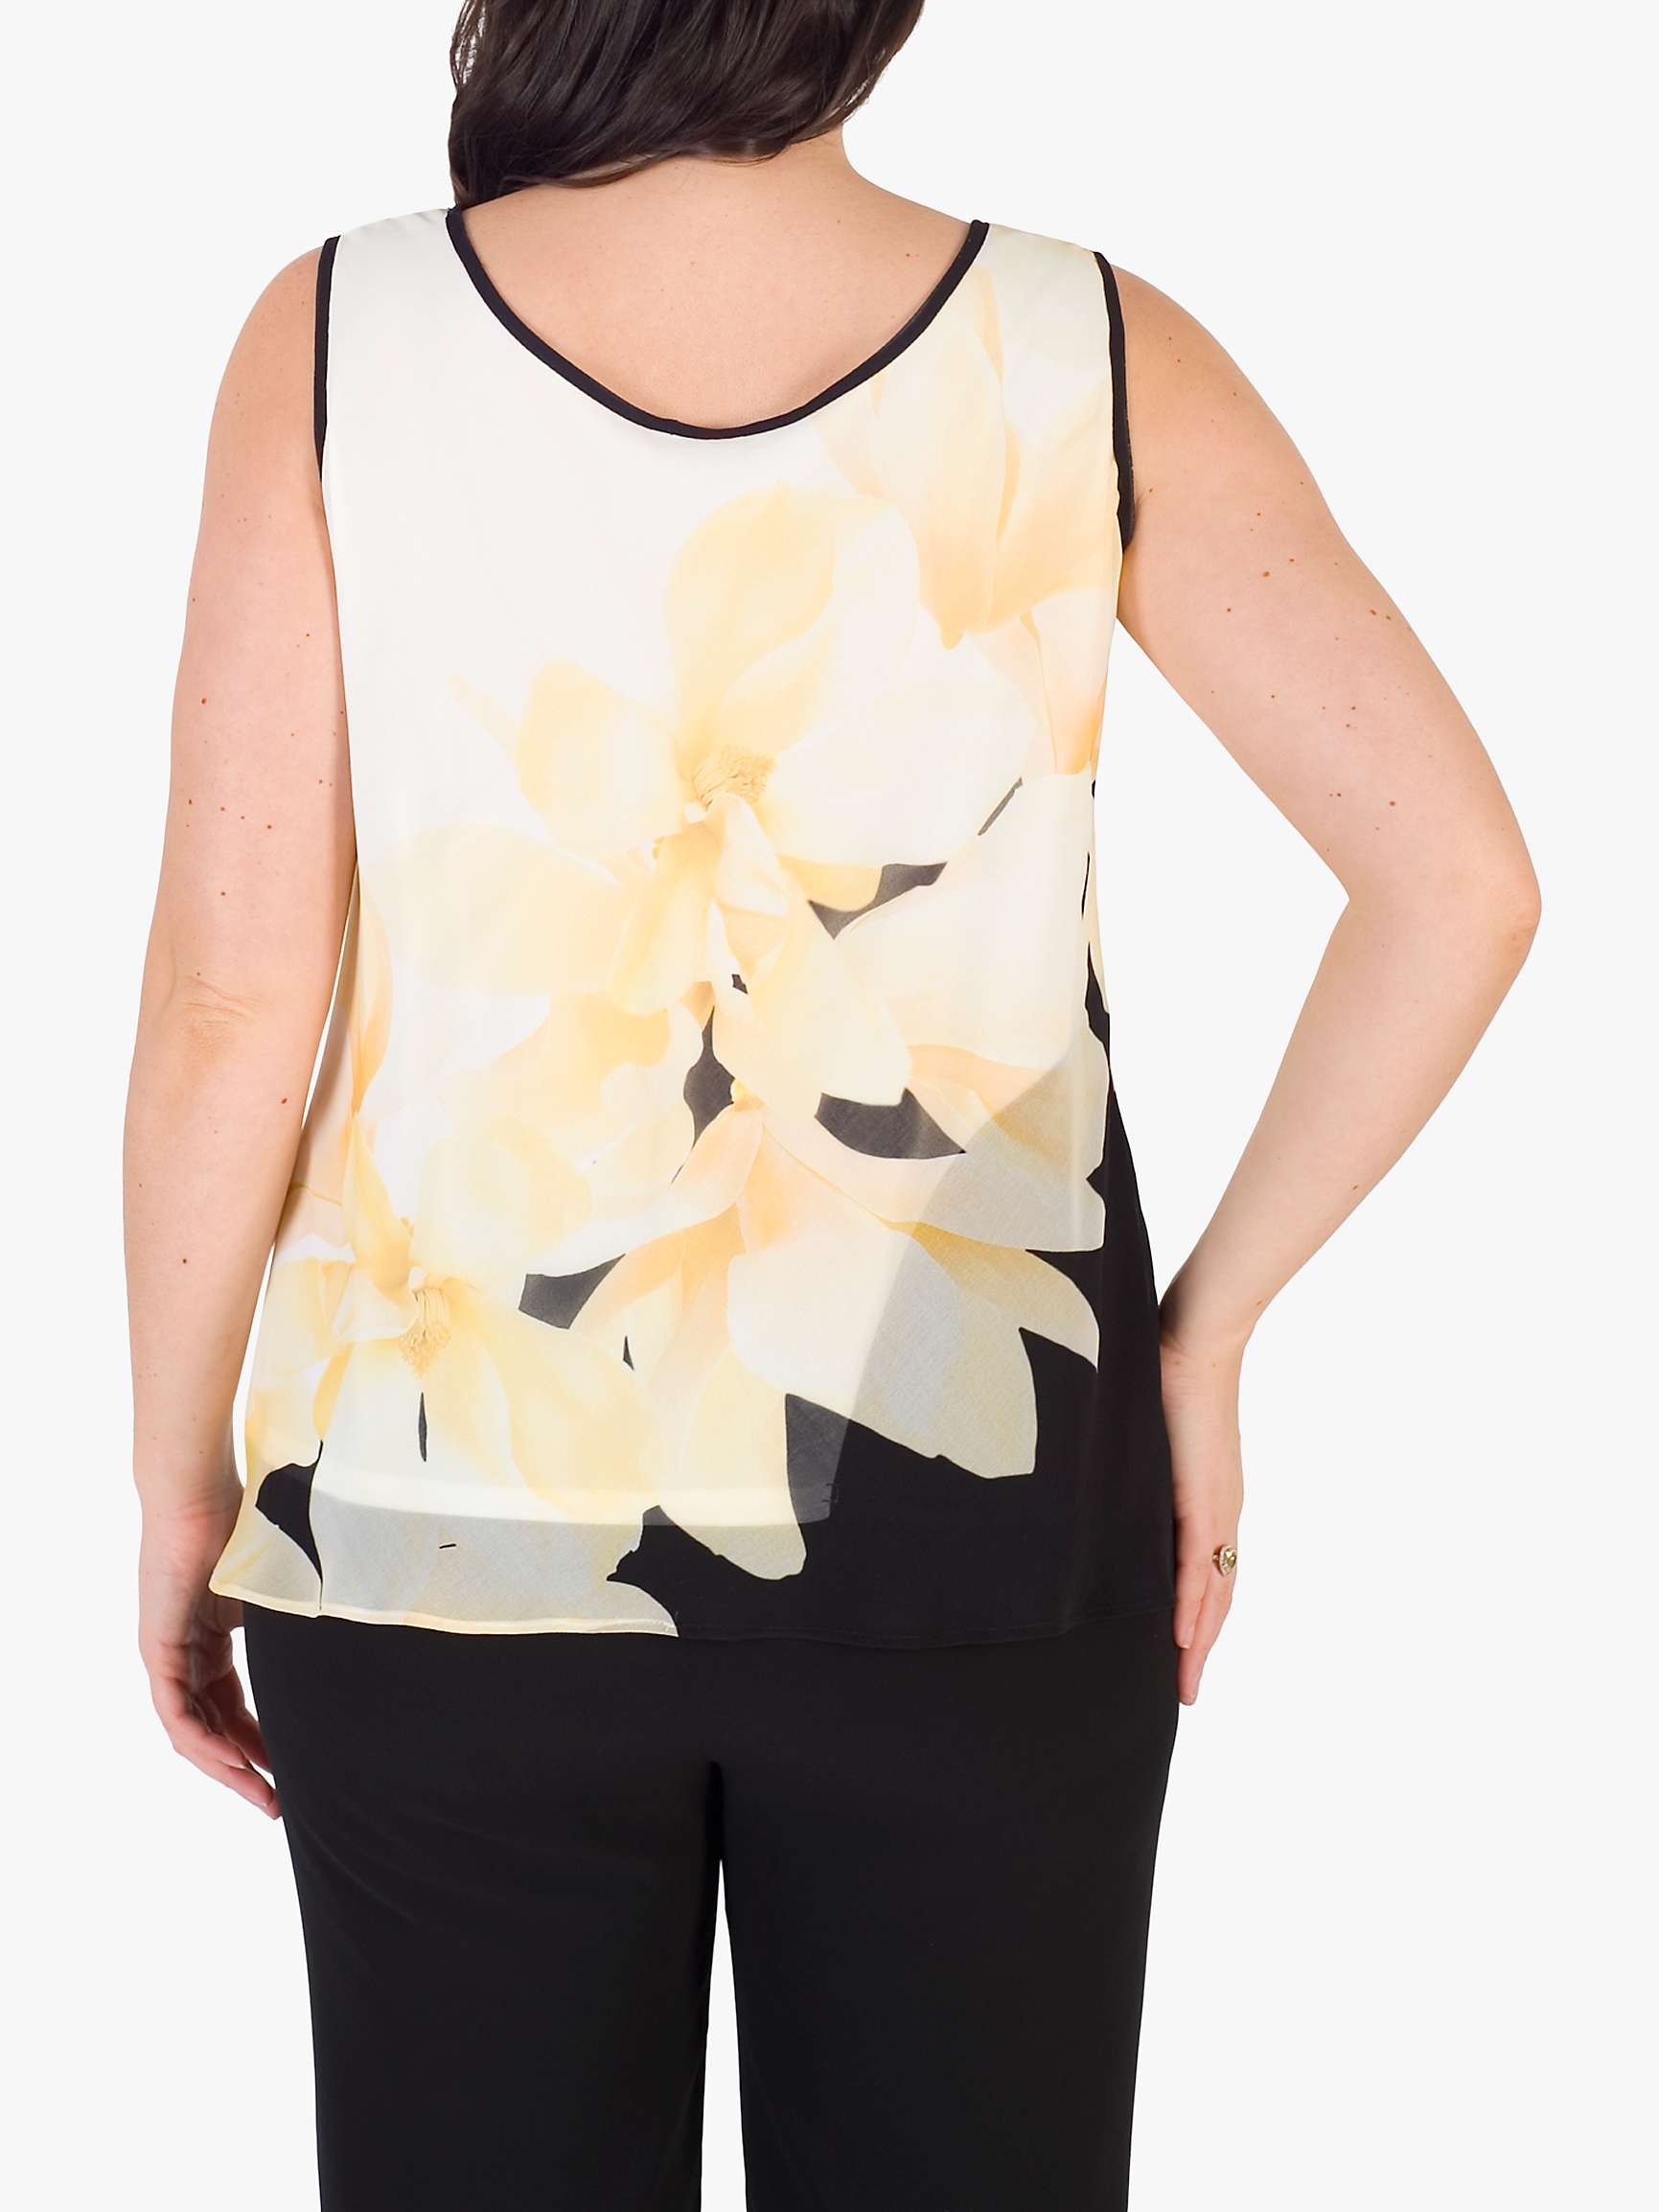 Buy chesca Chiffon Floral Print Cami Top, Black/Yellow/Ivory Online at johnlewis.com